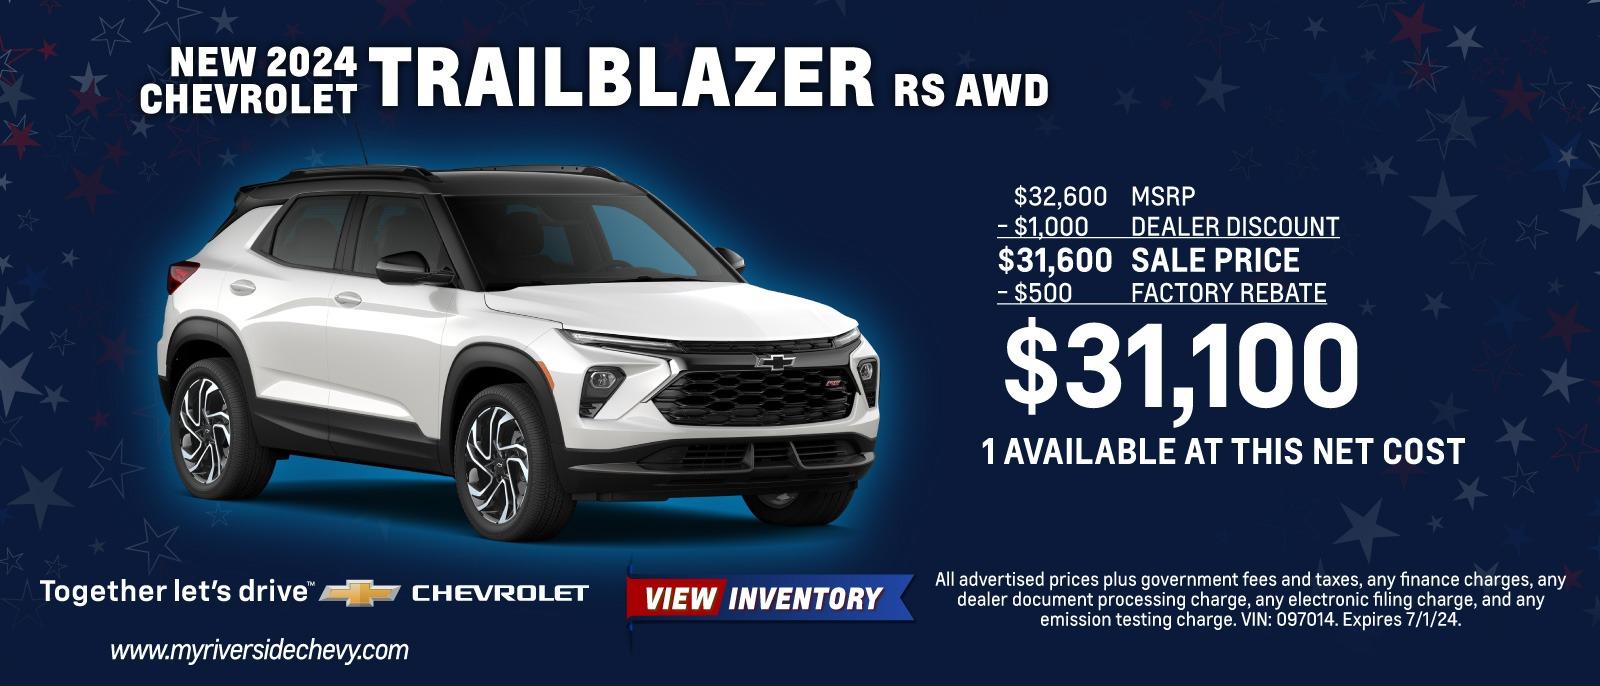 New 2024 Chevy  Trailblazer Rs AWD - $32,600 MSRP - $1,000 DEALER DISCOUNT $31,600 SALE PRICE - $500 FACTORY REBATE $31,100 1 AVAILABLE AT THIS NET COST